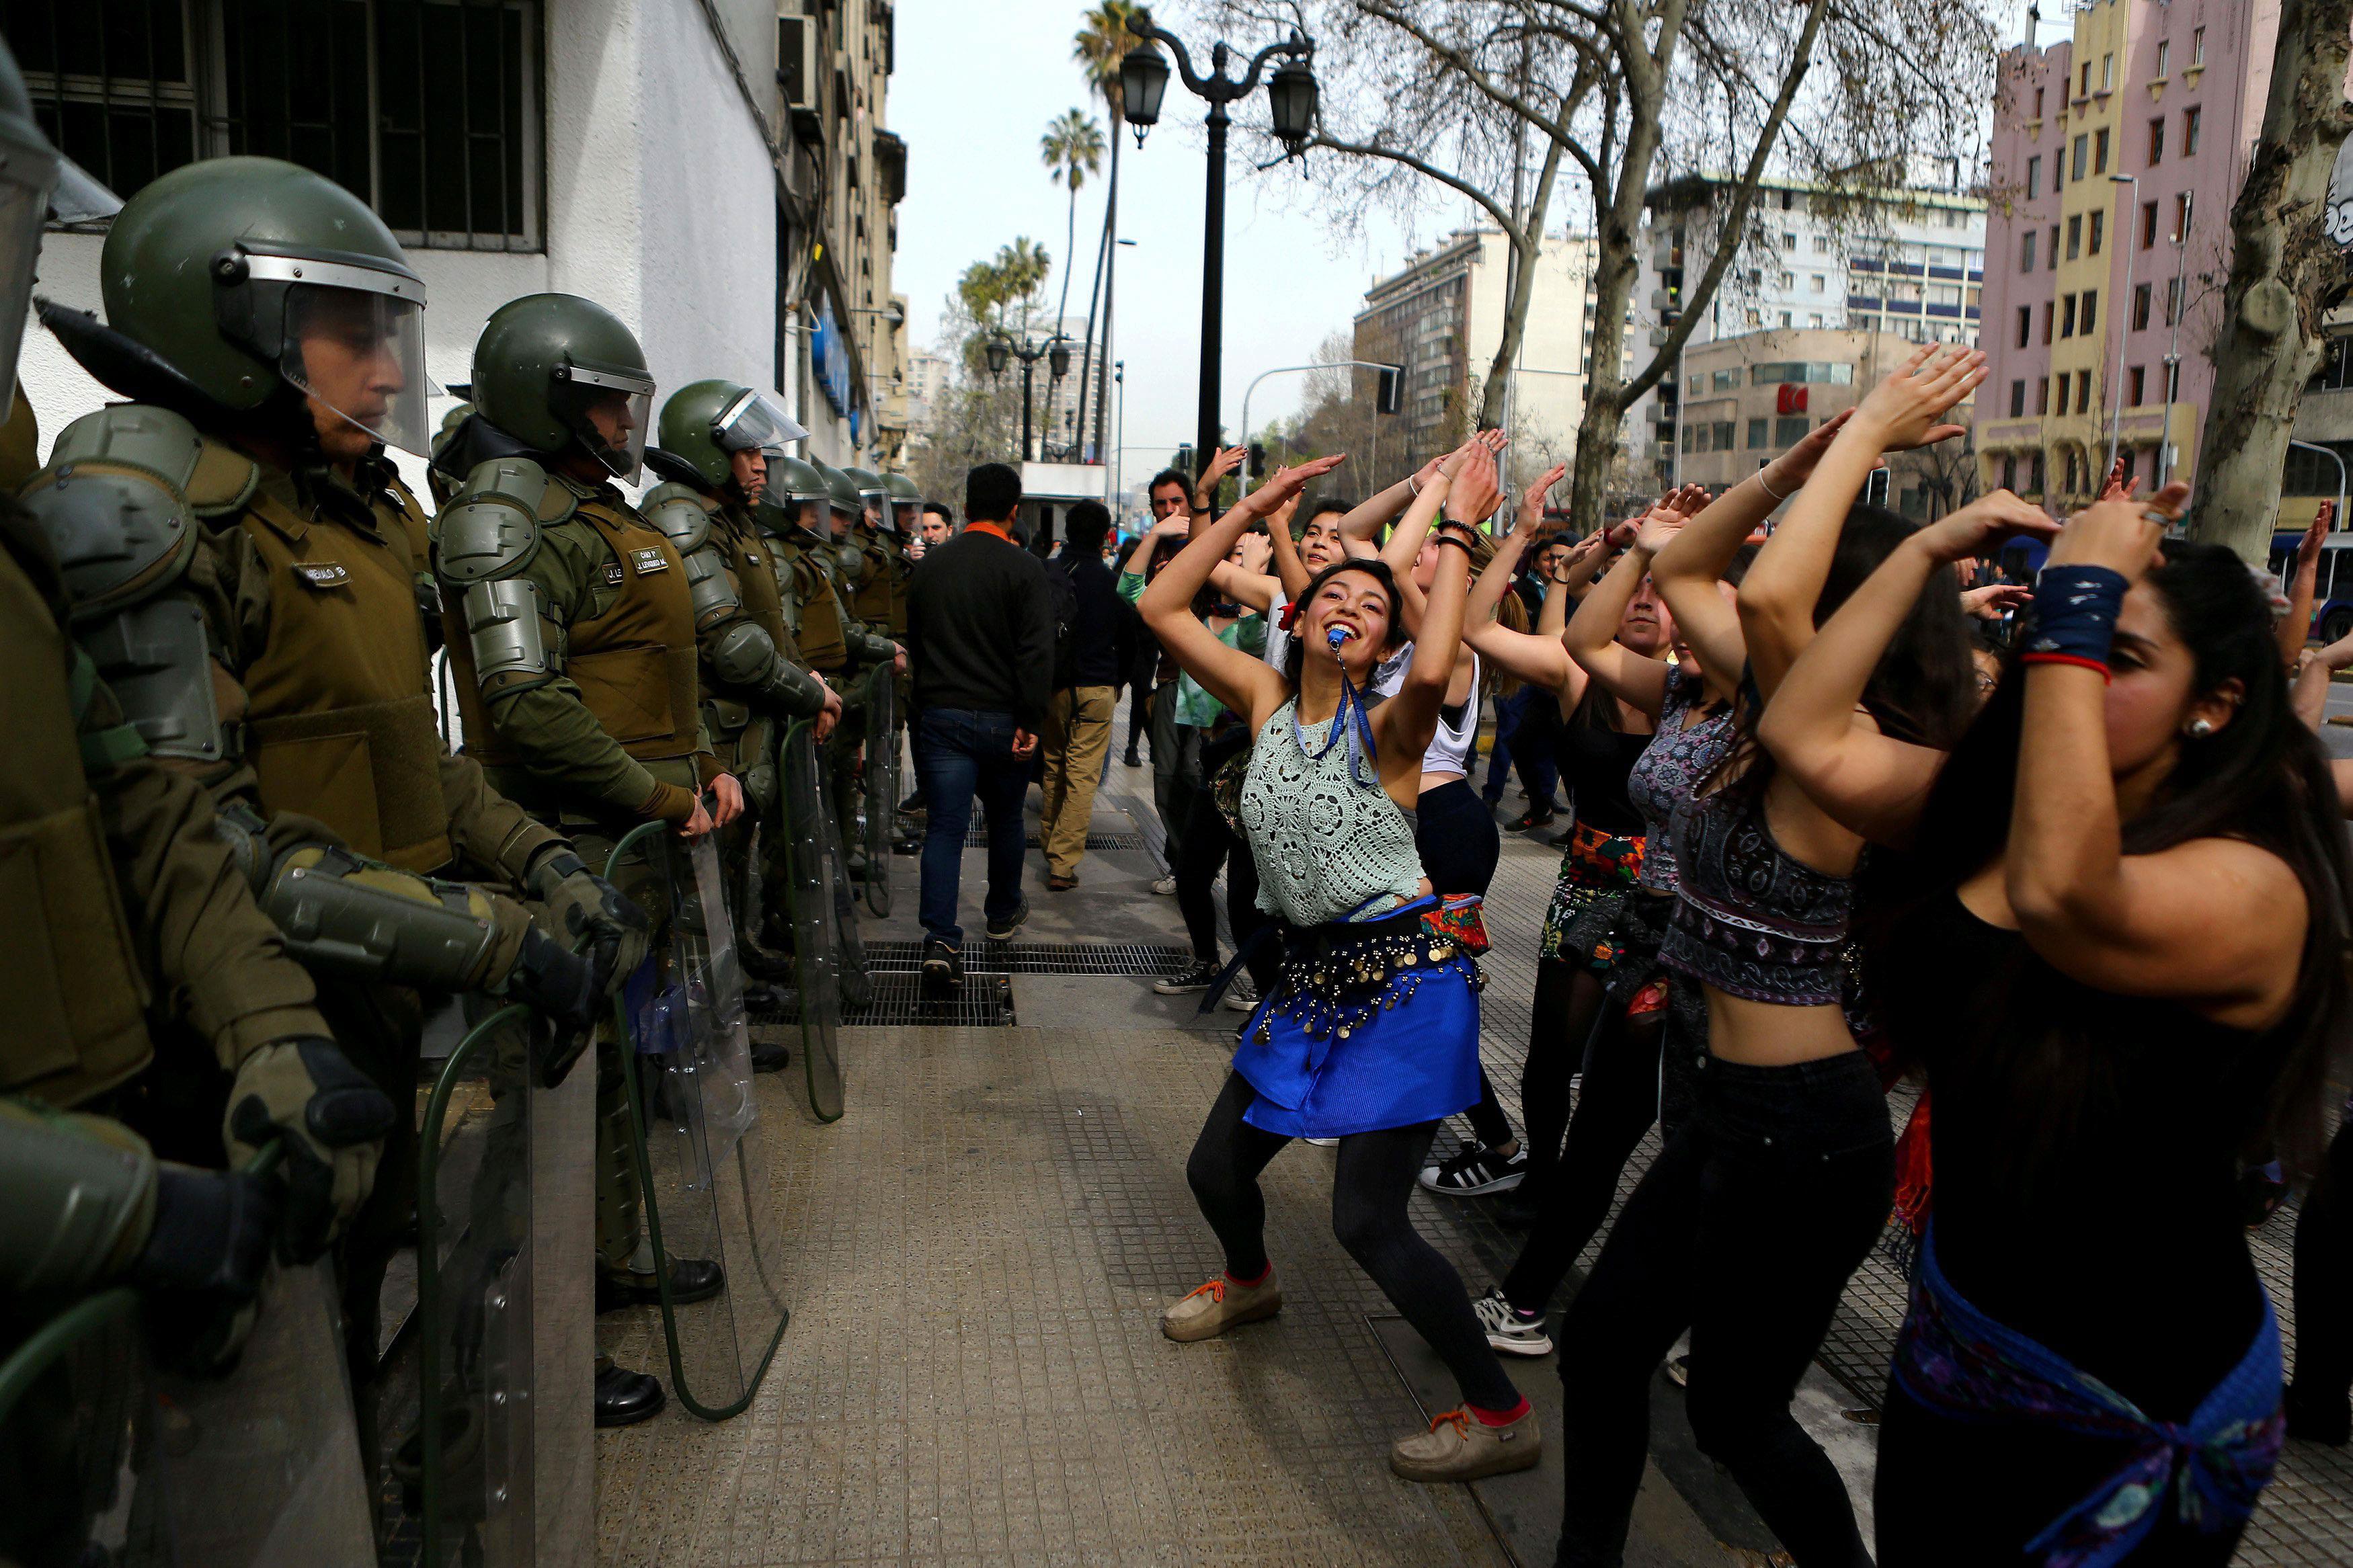 Demonstrators perform a dance in front of riot policemen during a march called by students to reques